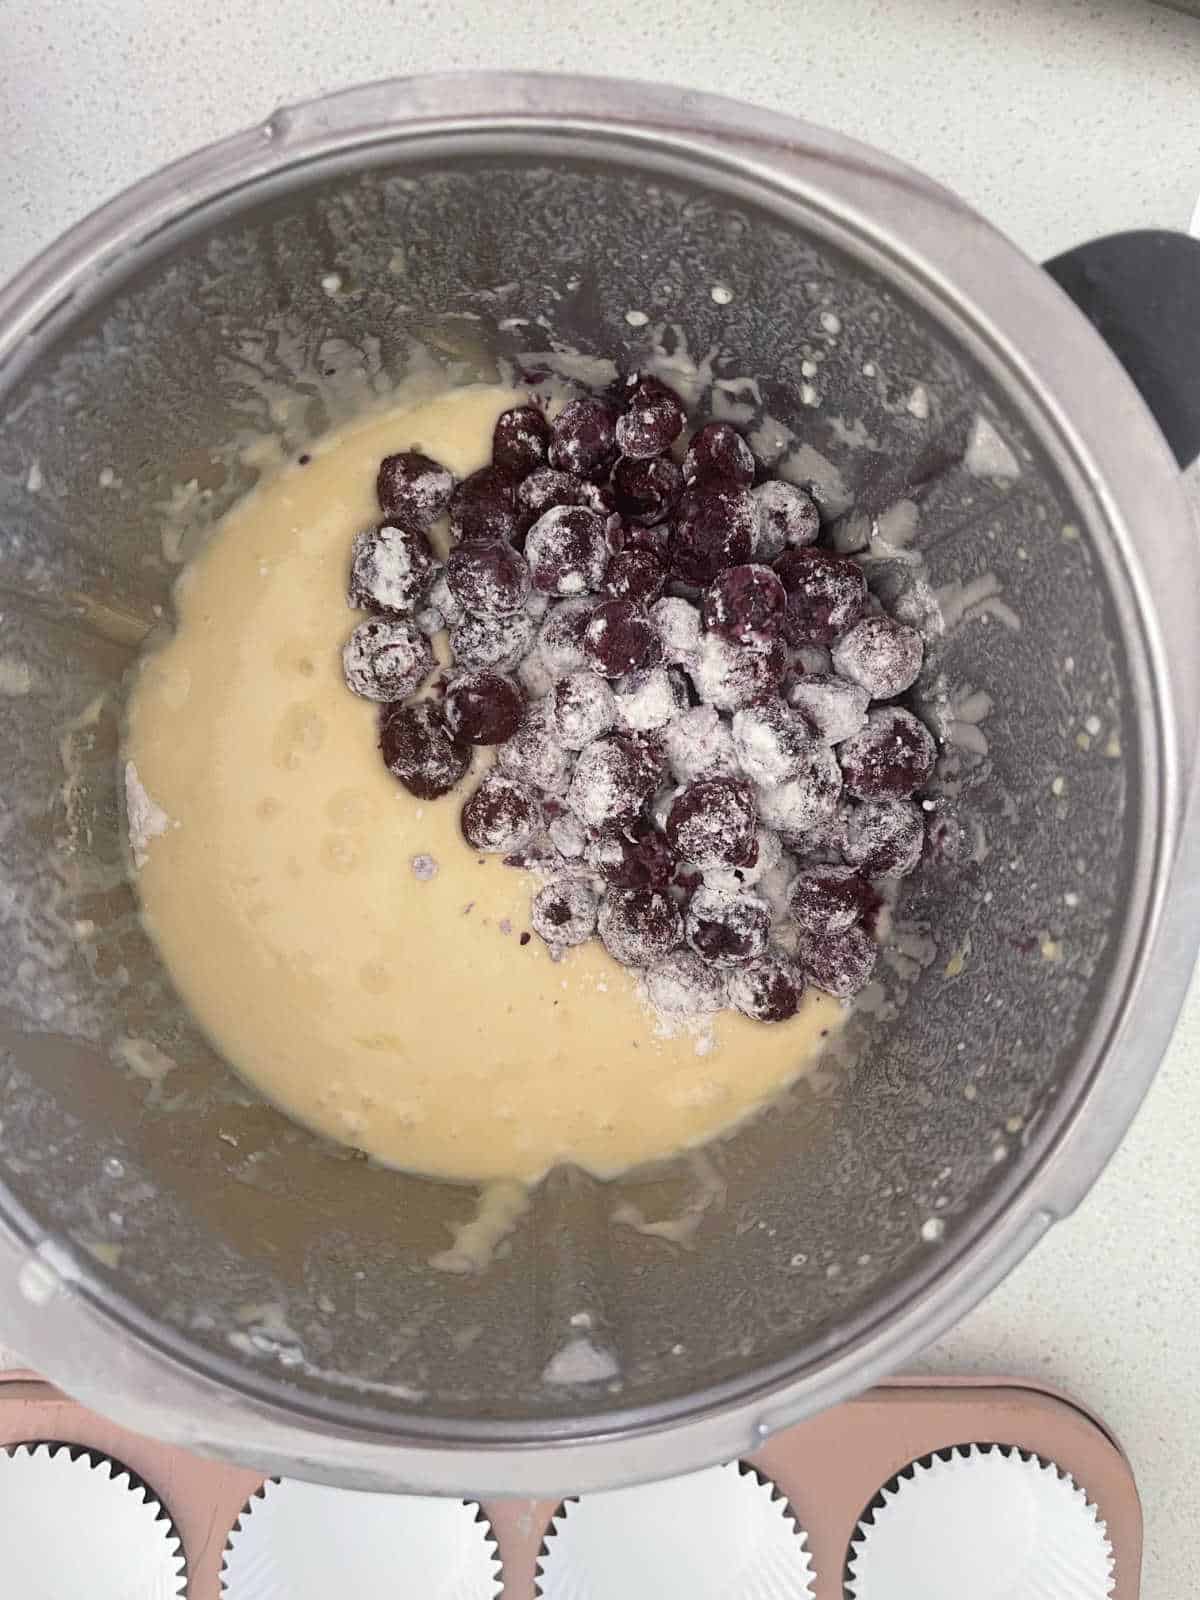 Blueberry muffin ingredients in a Thermomix bowl.